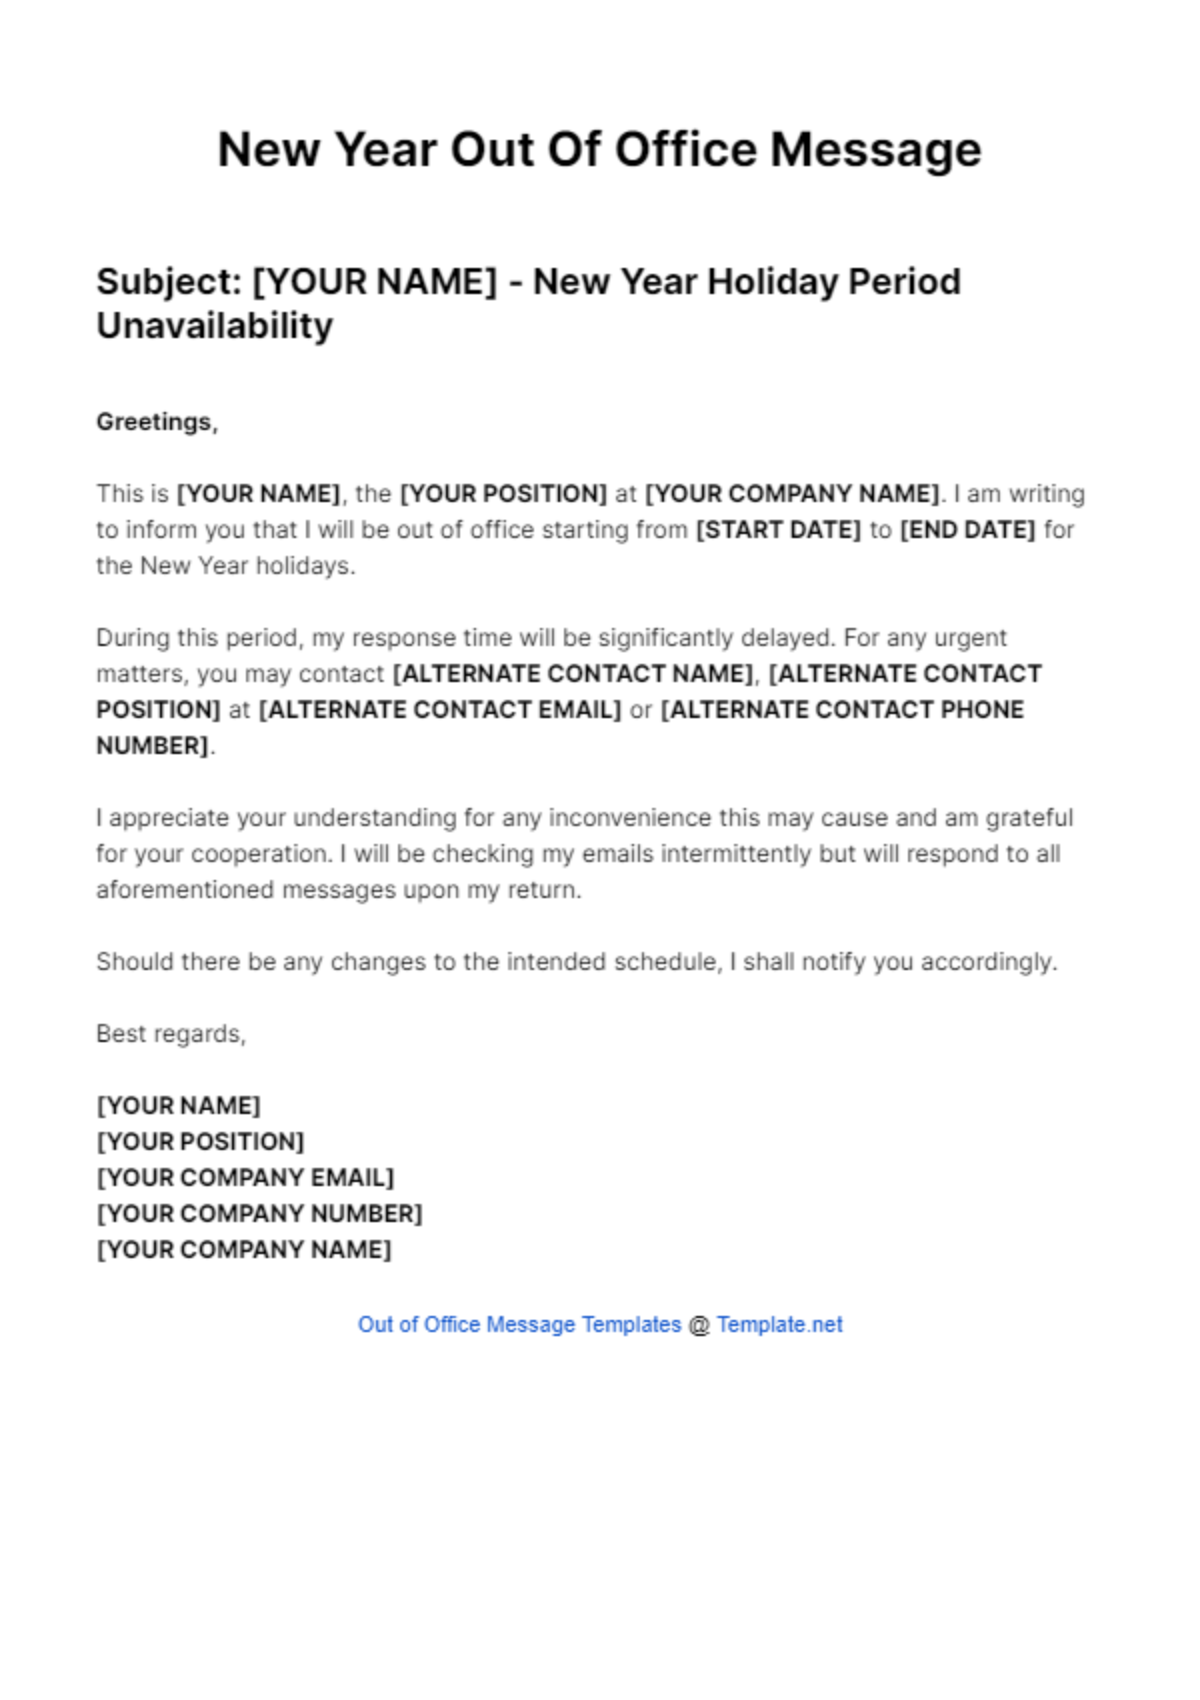 New Year Out Of Office Message Template